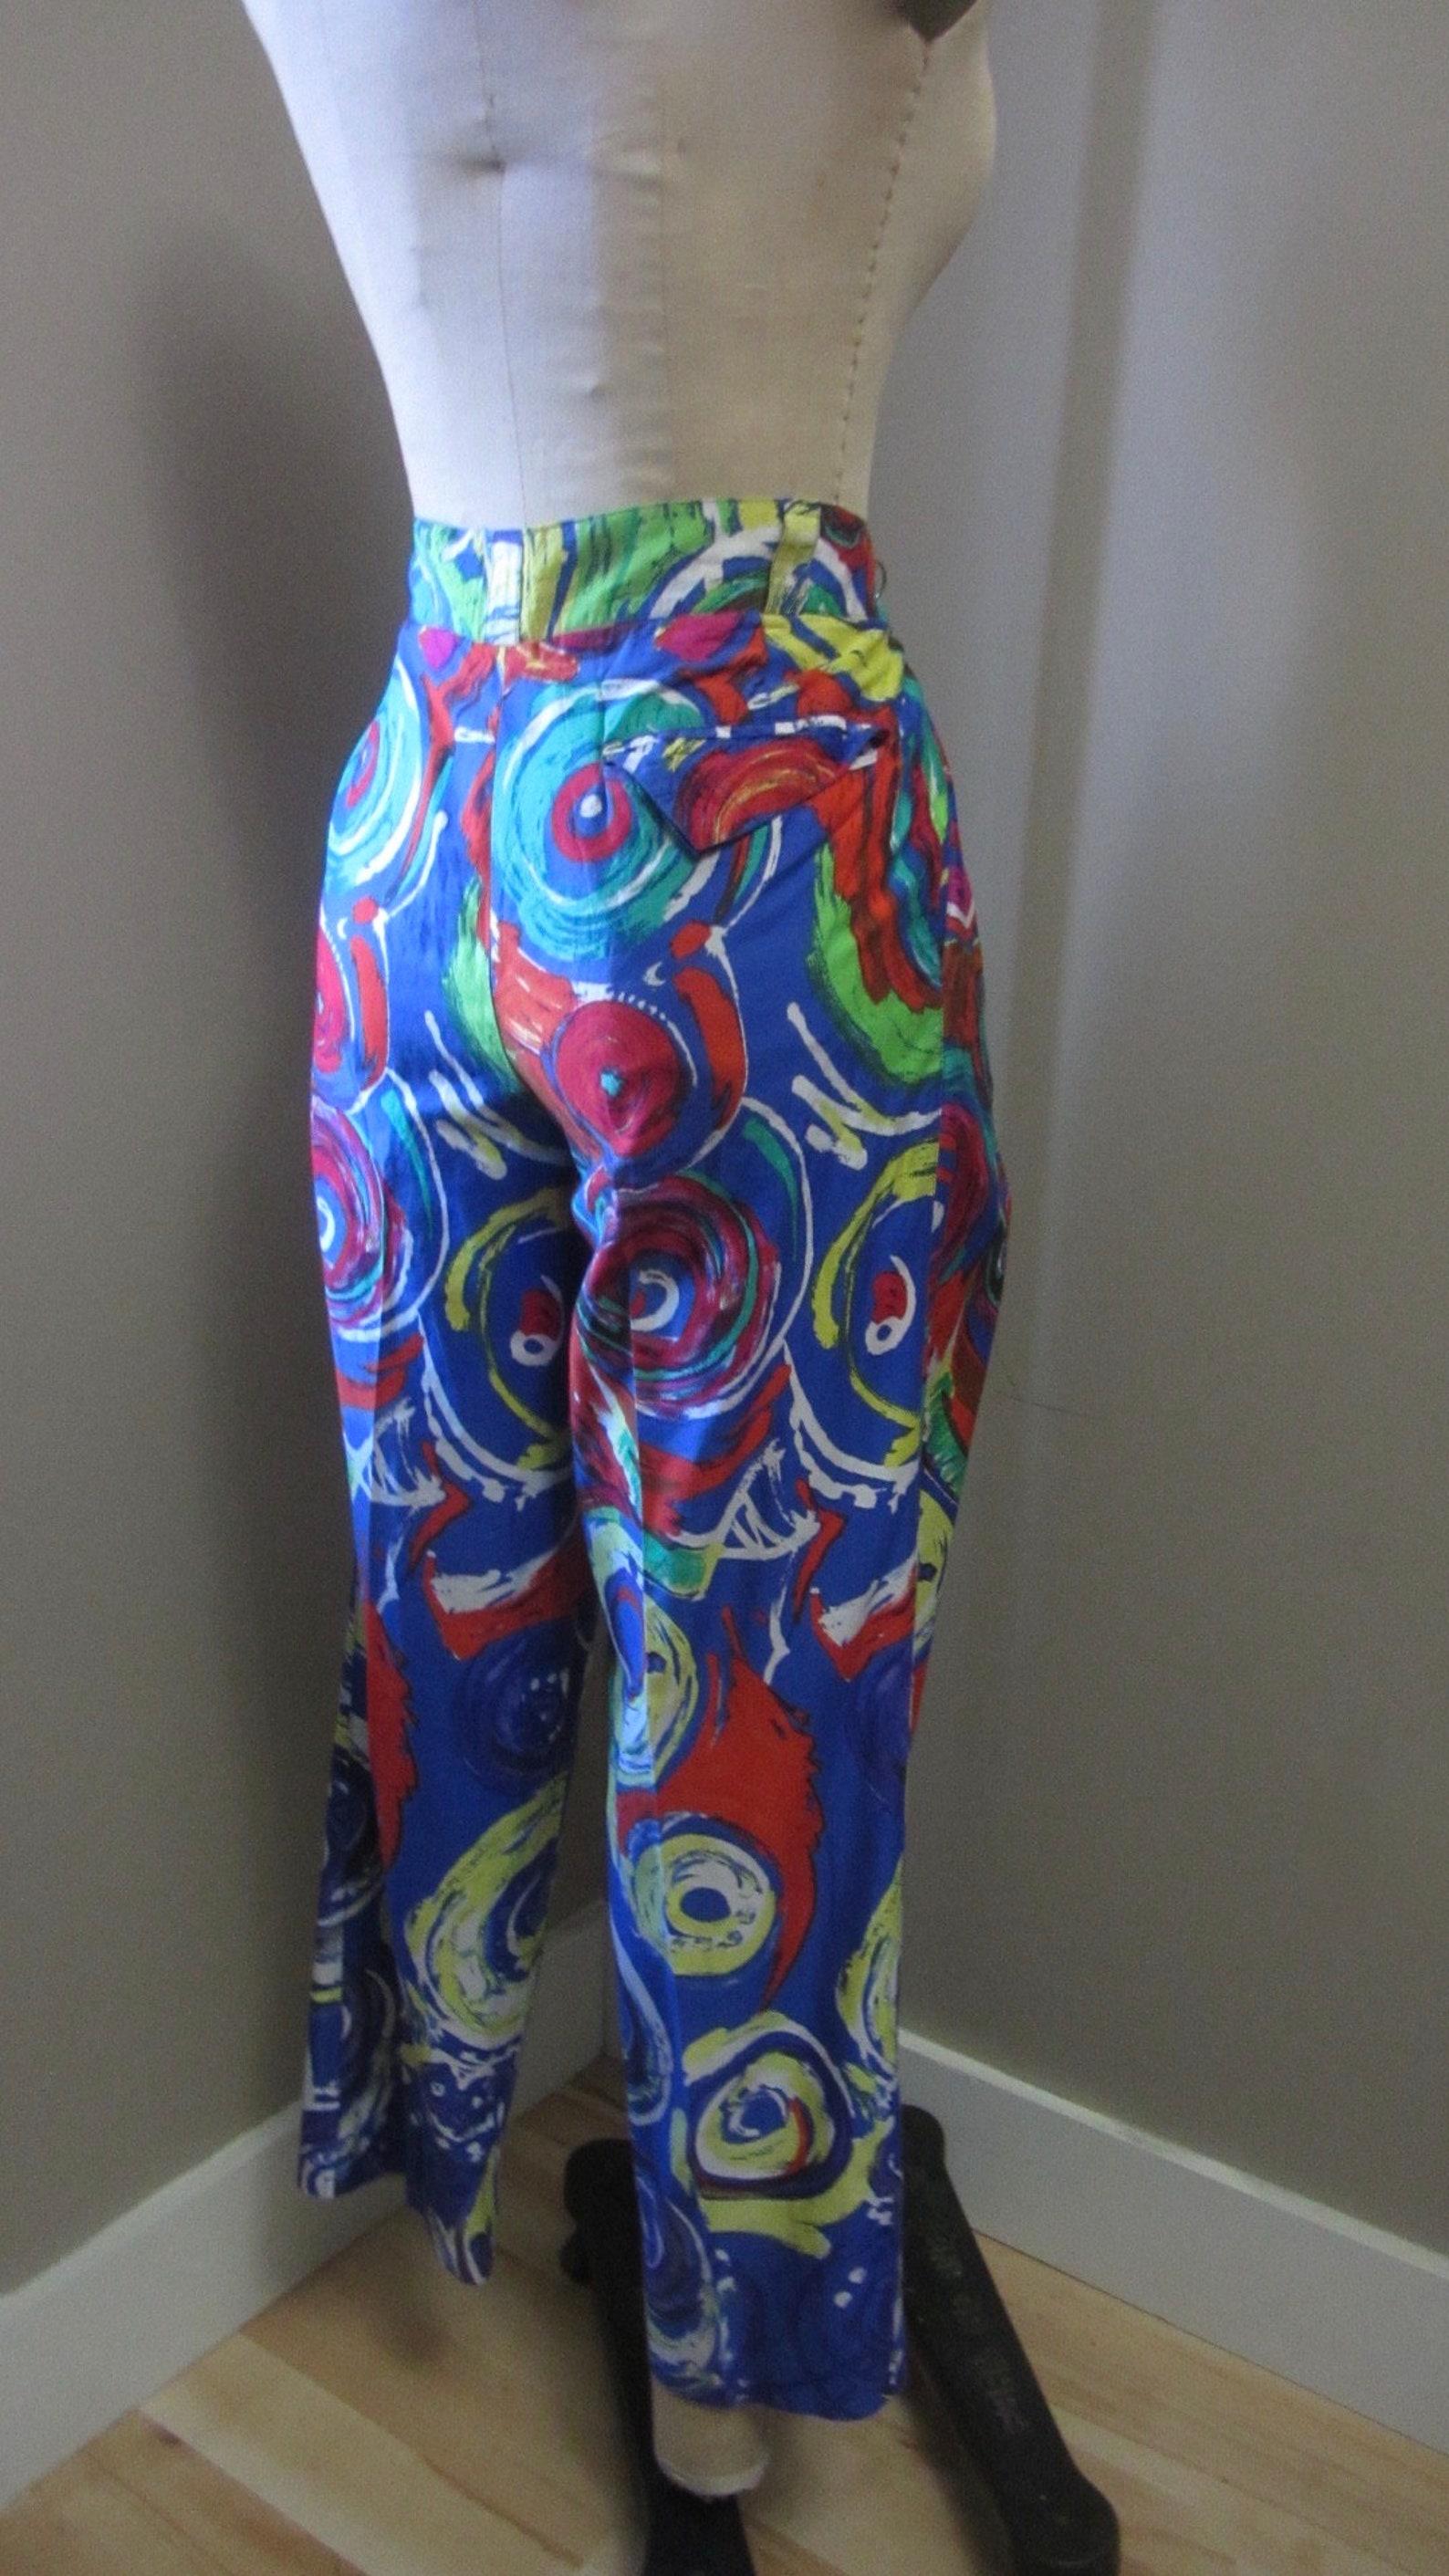 Vintage Gianni Versace colorful abstract print trousers. high waist. loose fit. tapered leg. slant hip pockets. zip fly closure.

✩ These pants are an amazing find, rare!

Circa 1991 - Spring Collection
Gianni Versace
Made in Italy
100%